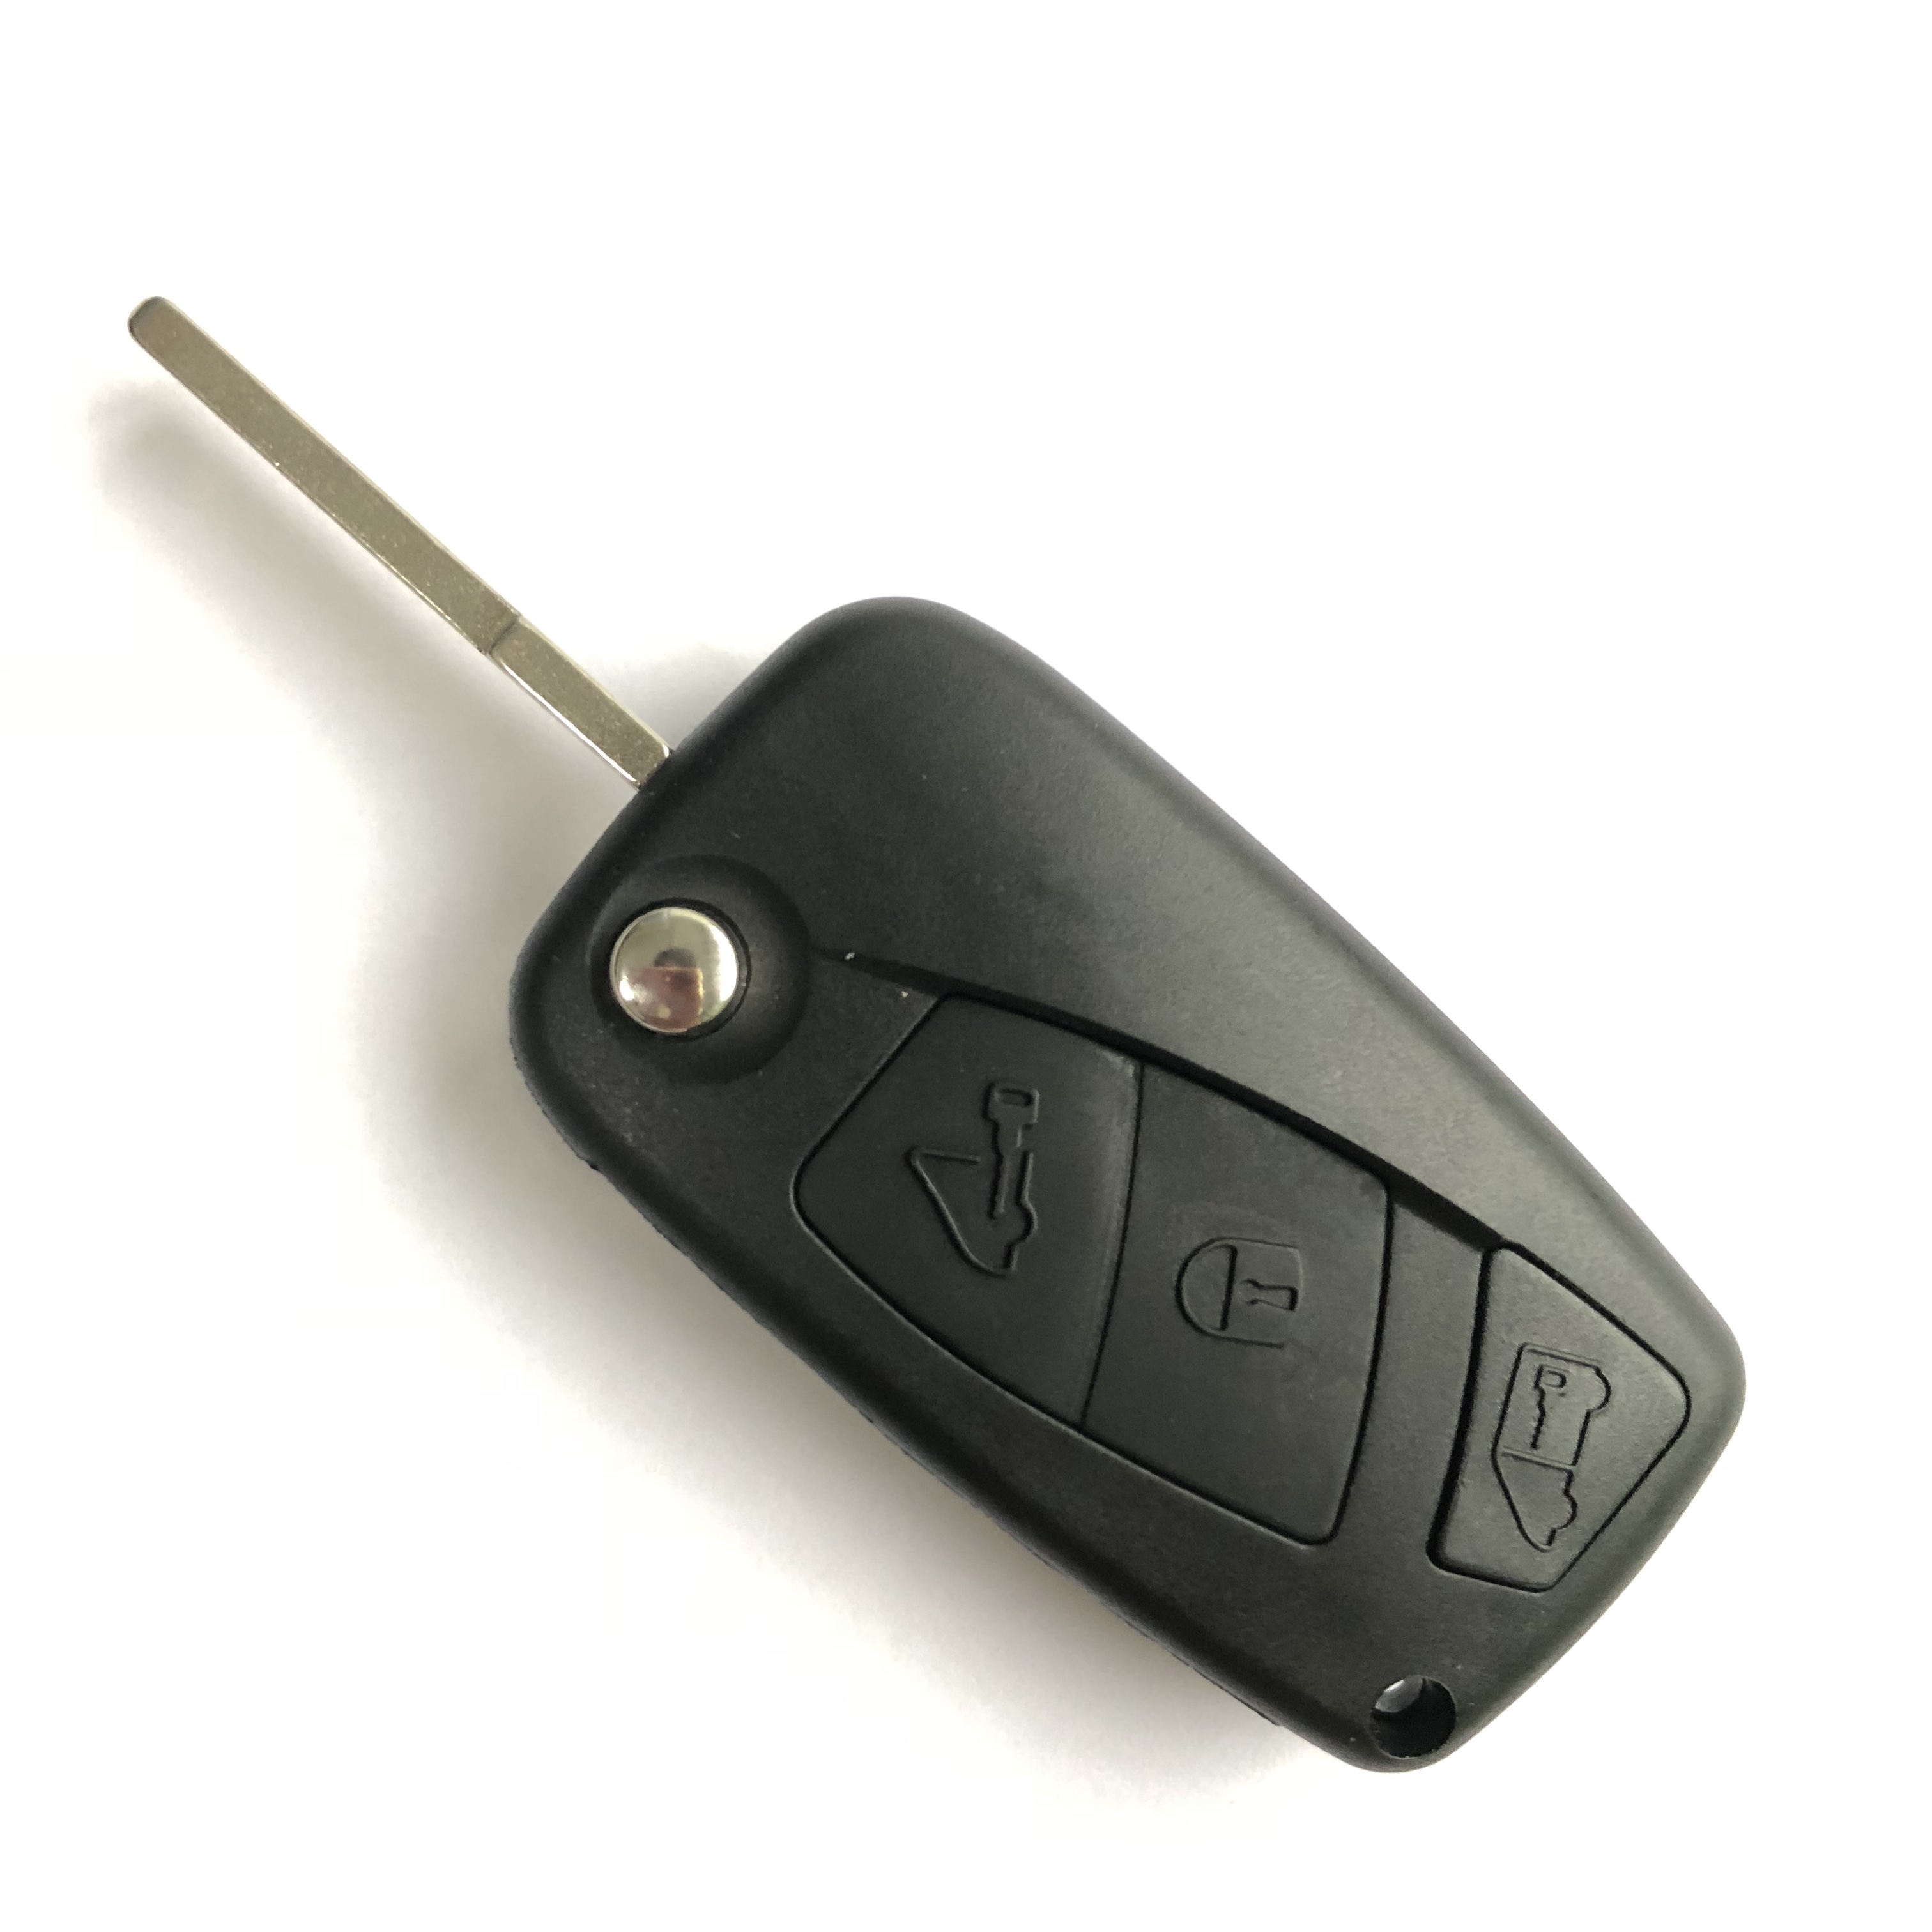 3 Buttons 434 MHz Flip Remote Key for Fiat Fiorino Flip - Delphi BSI Type PCF7946 High Quality